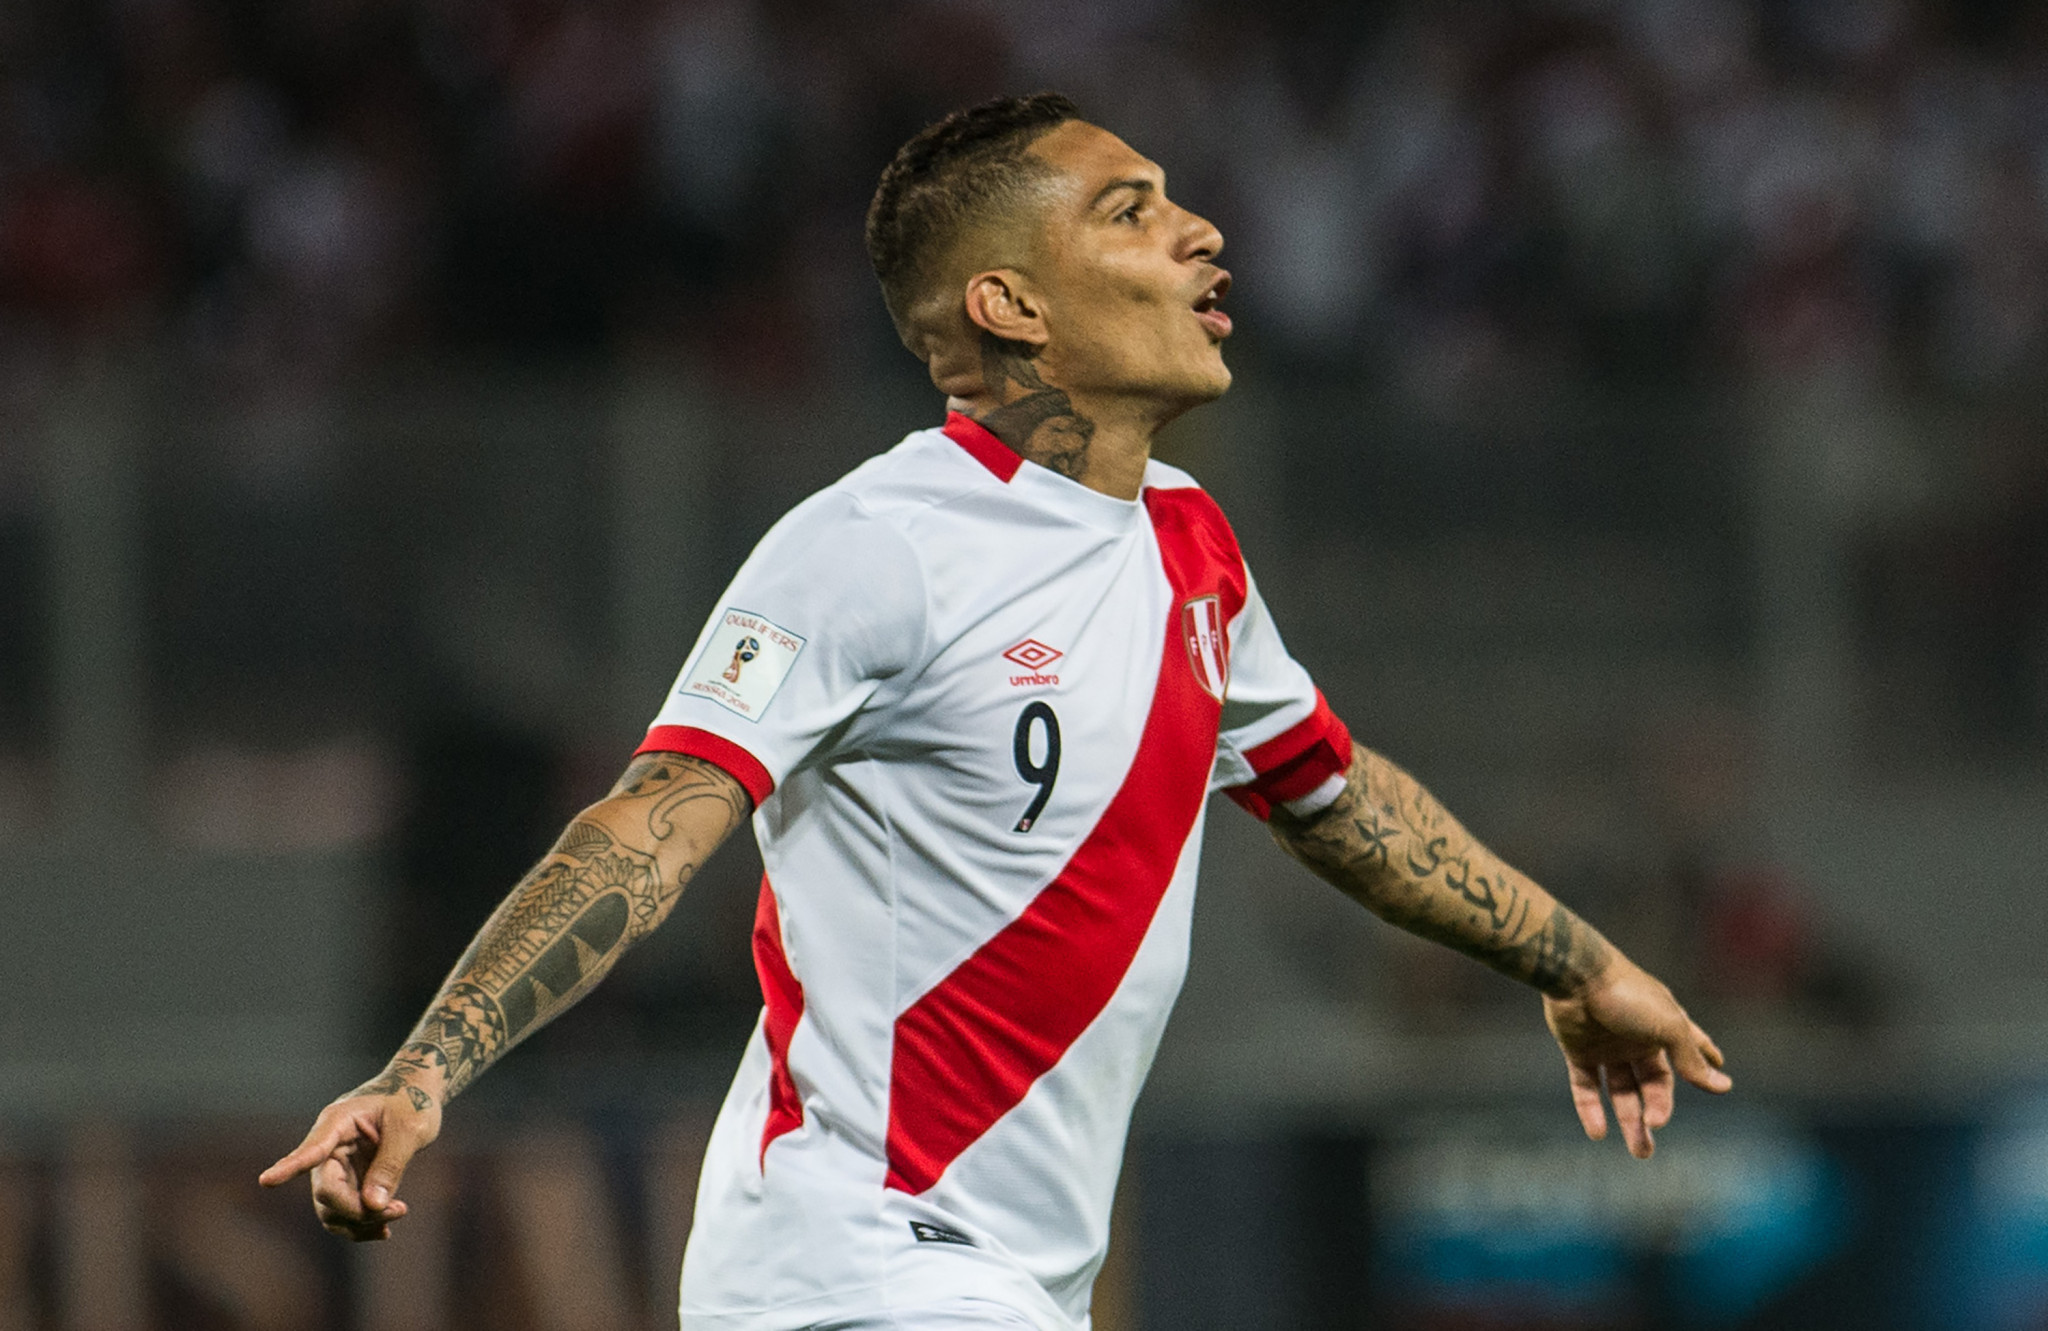 Peru captain Guerrero could play at FIFA World Cup following reduction of drugs ban